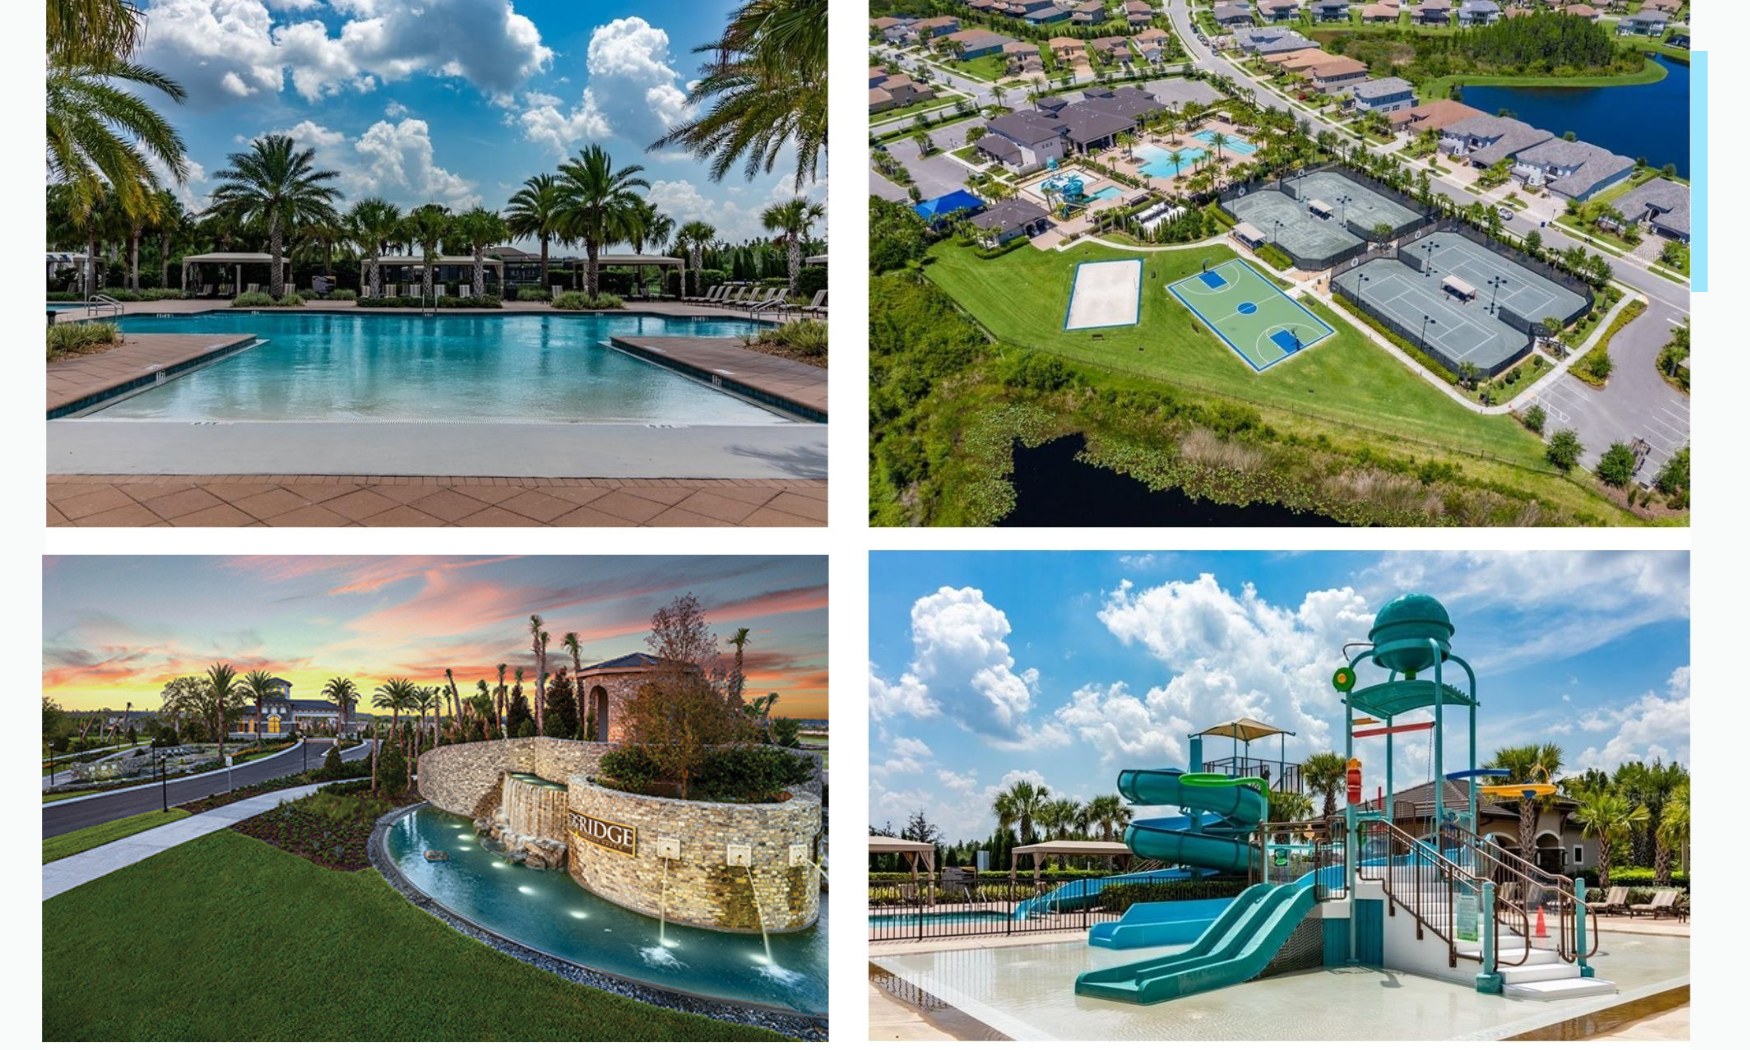 Pros of Living in a HOA Community picture shows the water slides, pools, tennis courts and entrance of the community.